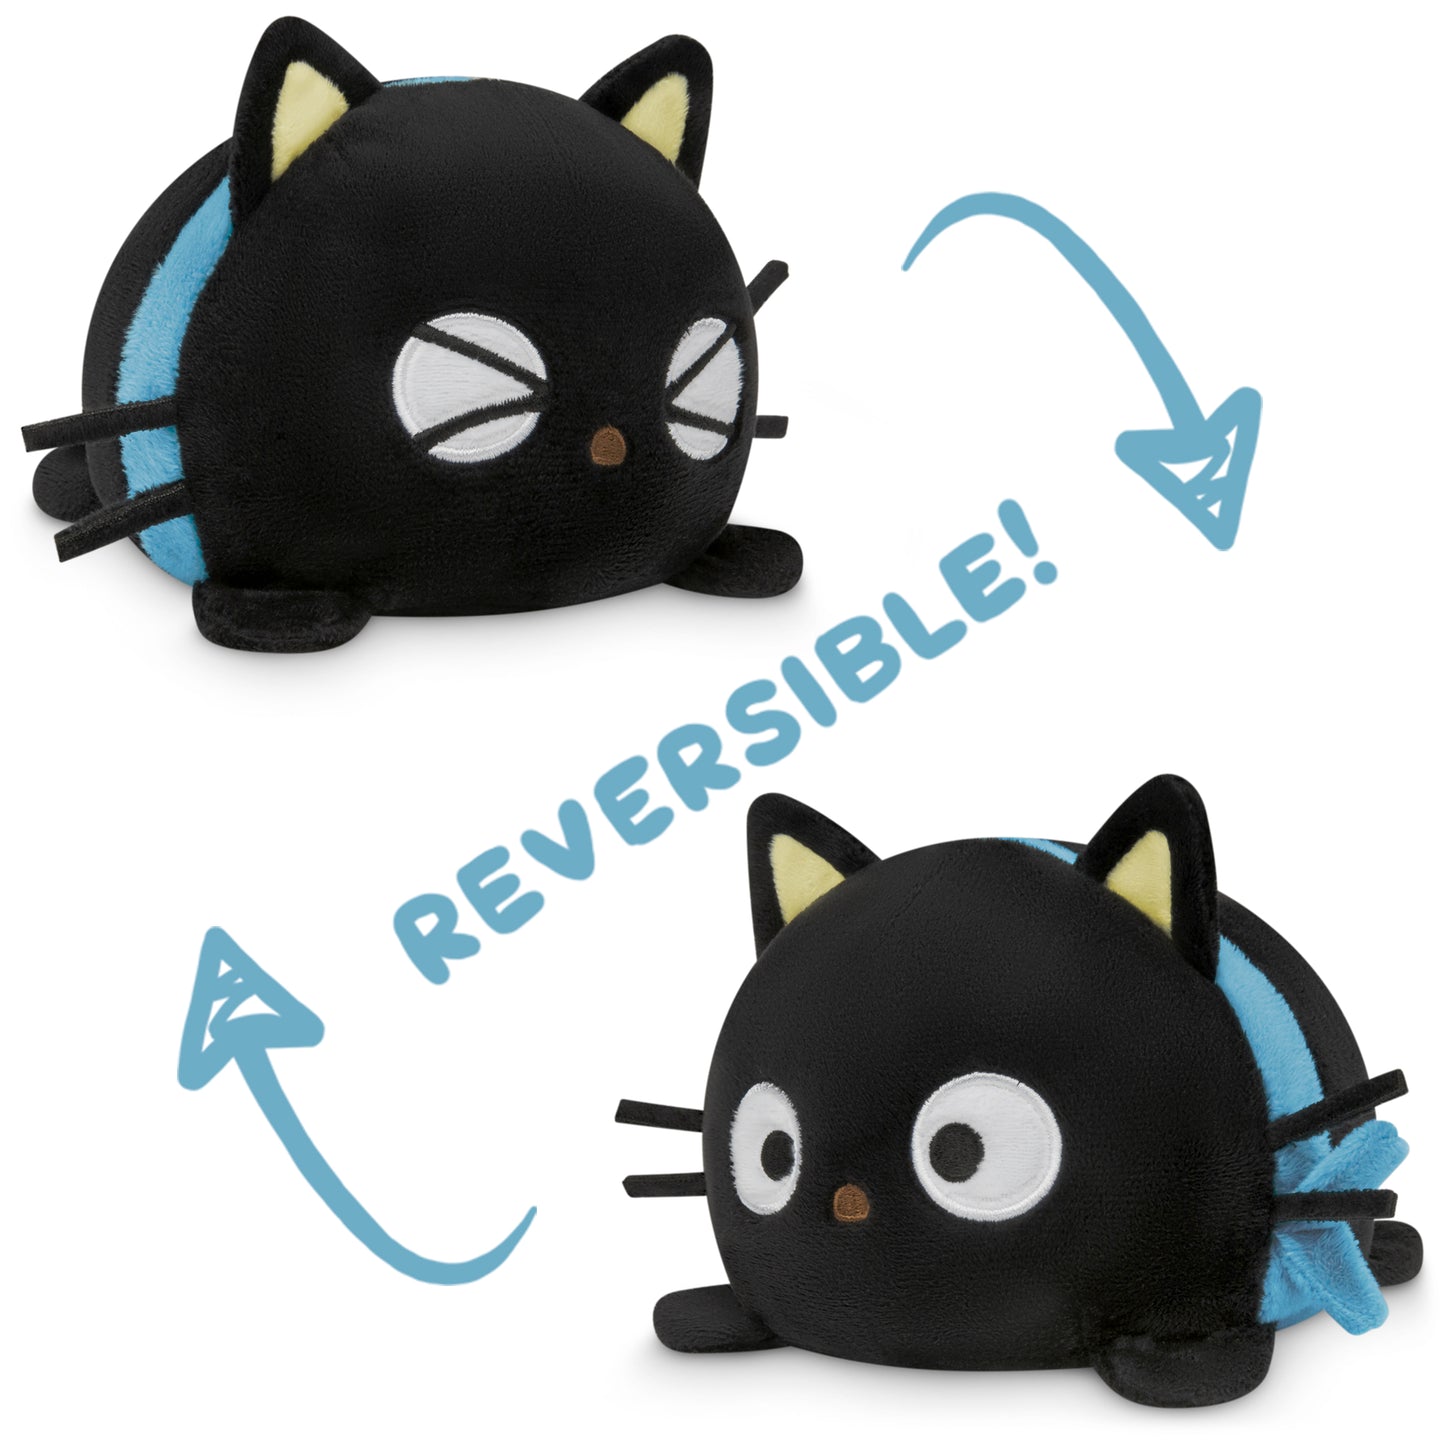 Two TeeTurtle Reversible Chococat Plushies by Sanrio, with the words reversible.